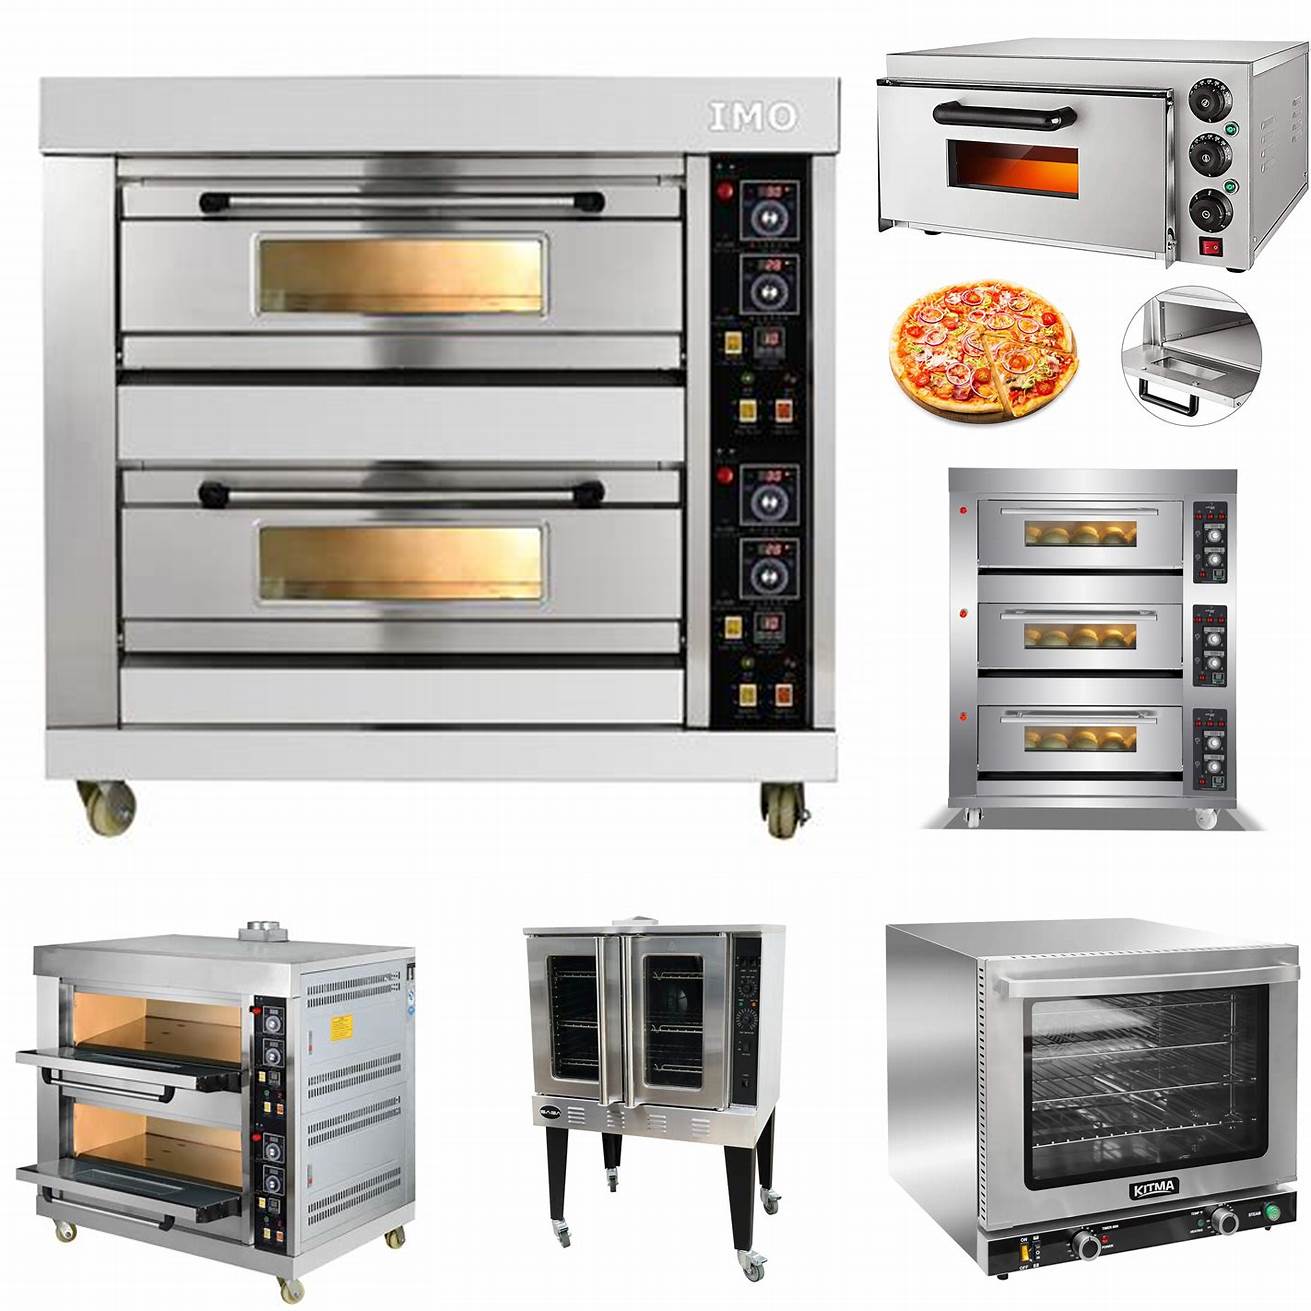 1 Commercial oven